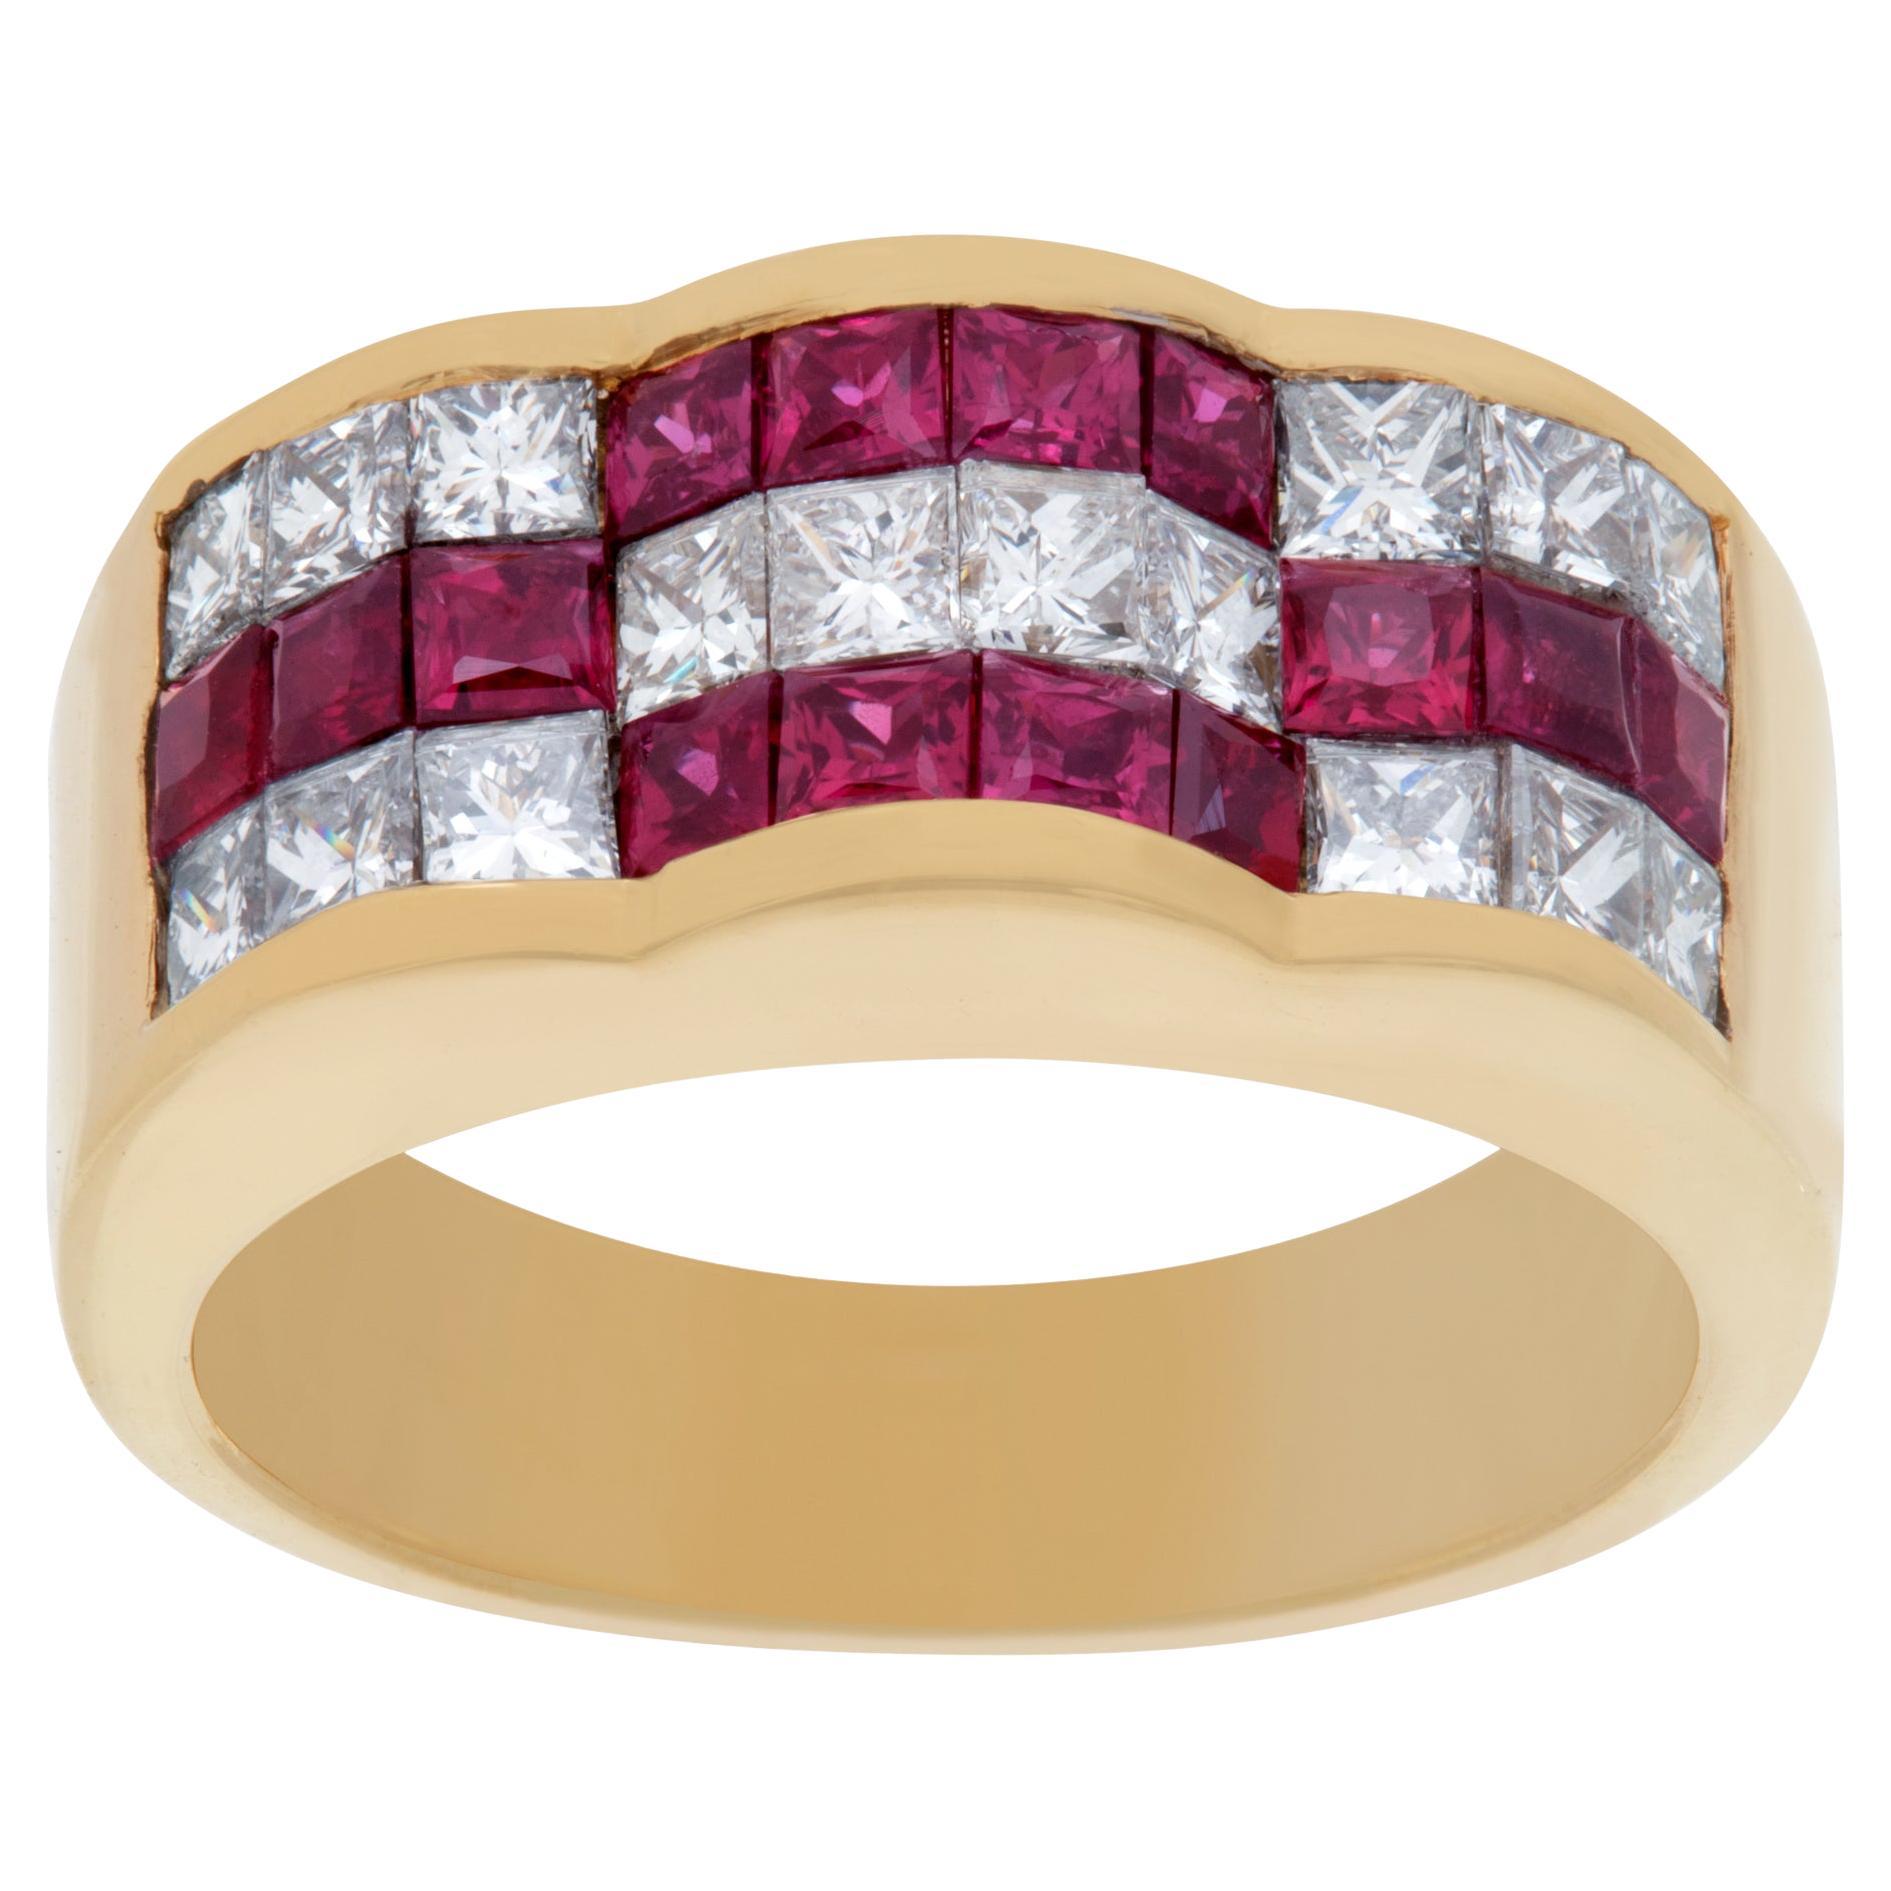 Channel Set Diamond and Ruby Ring in 18k Yellow Gold, 1.12 Carats in Diamonds